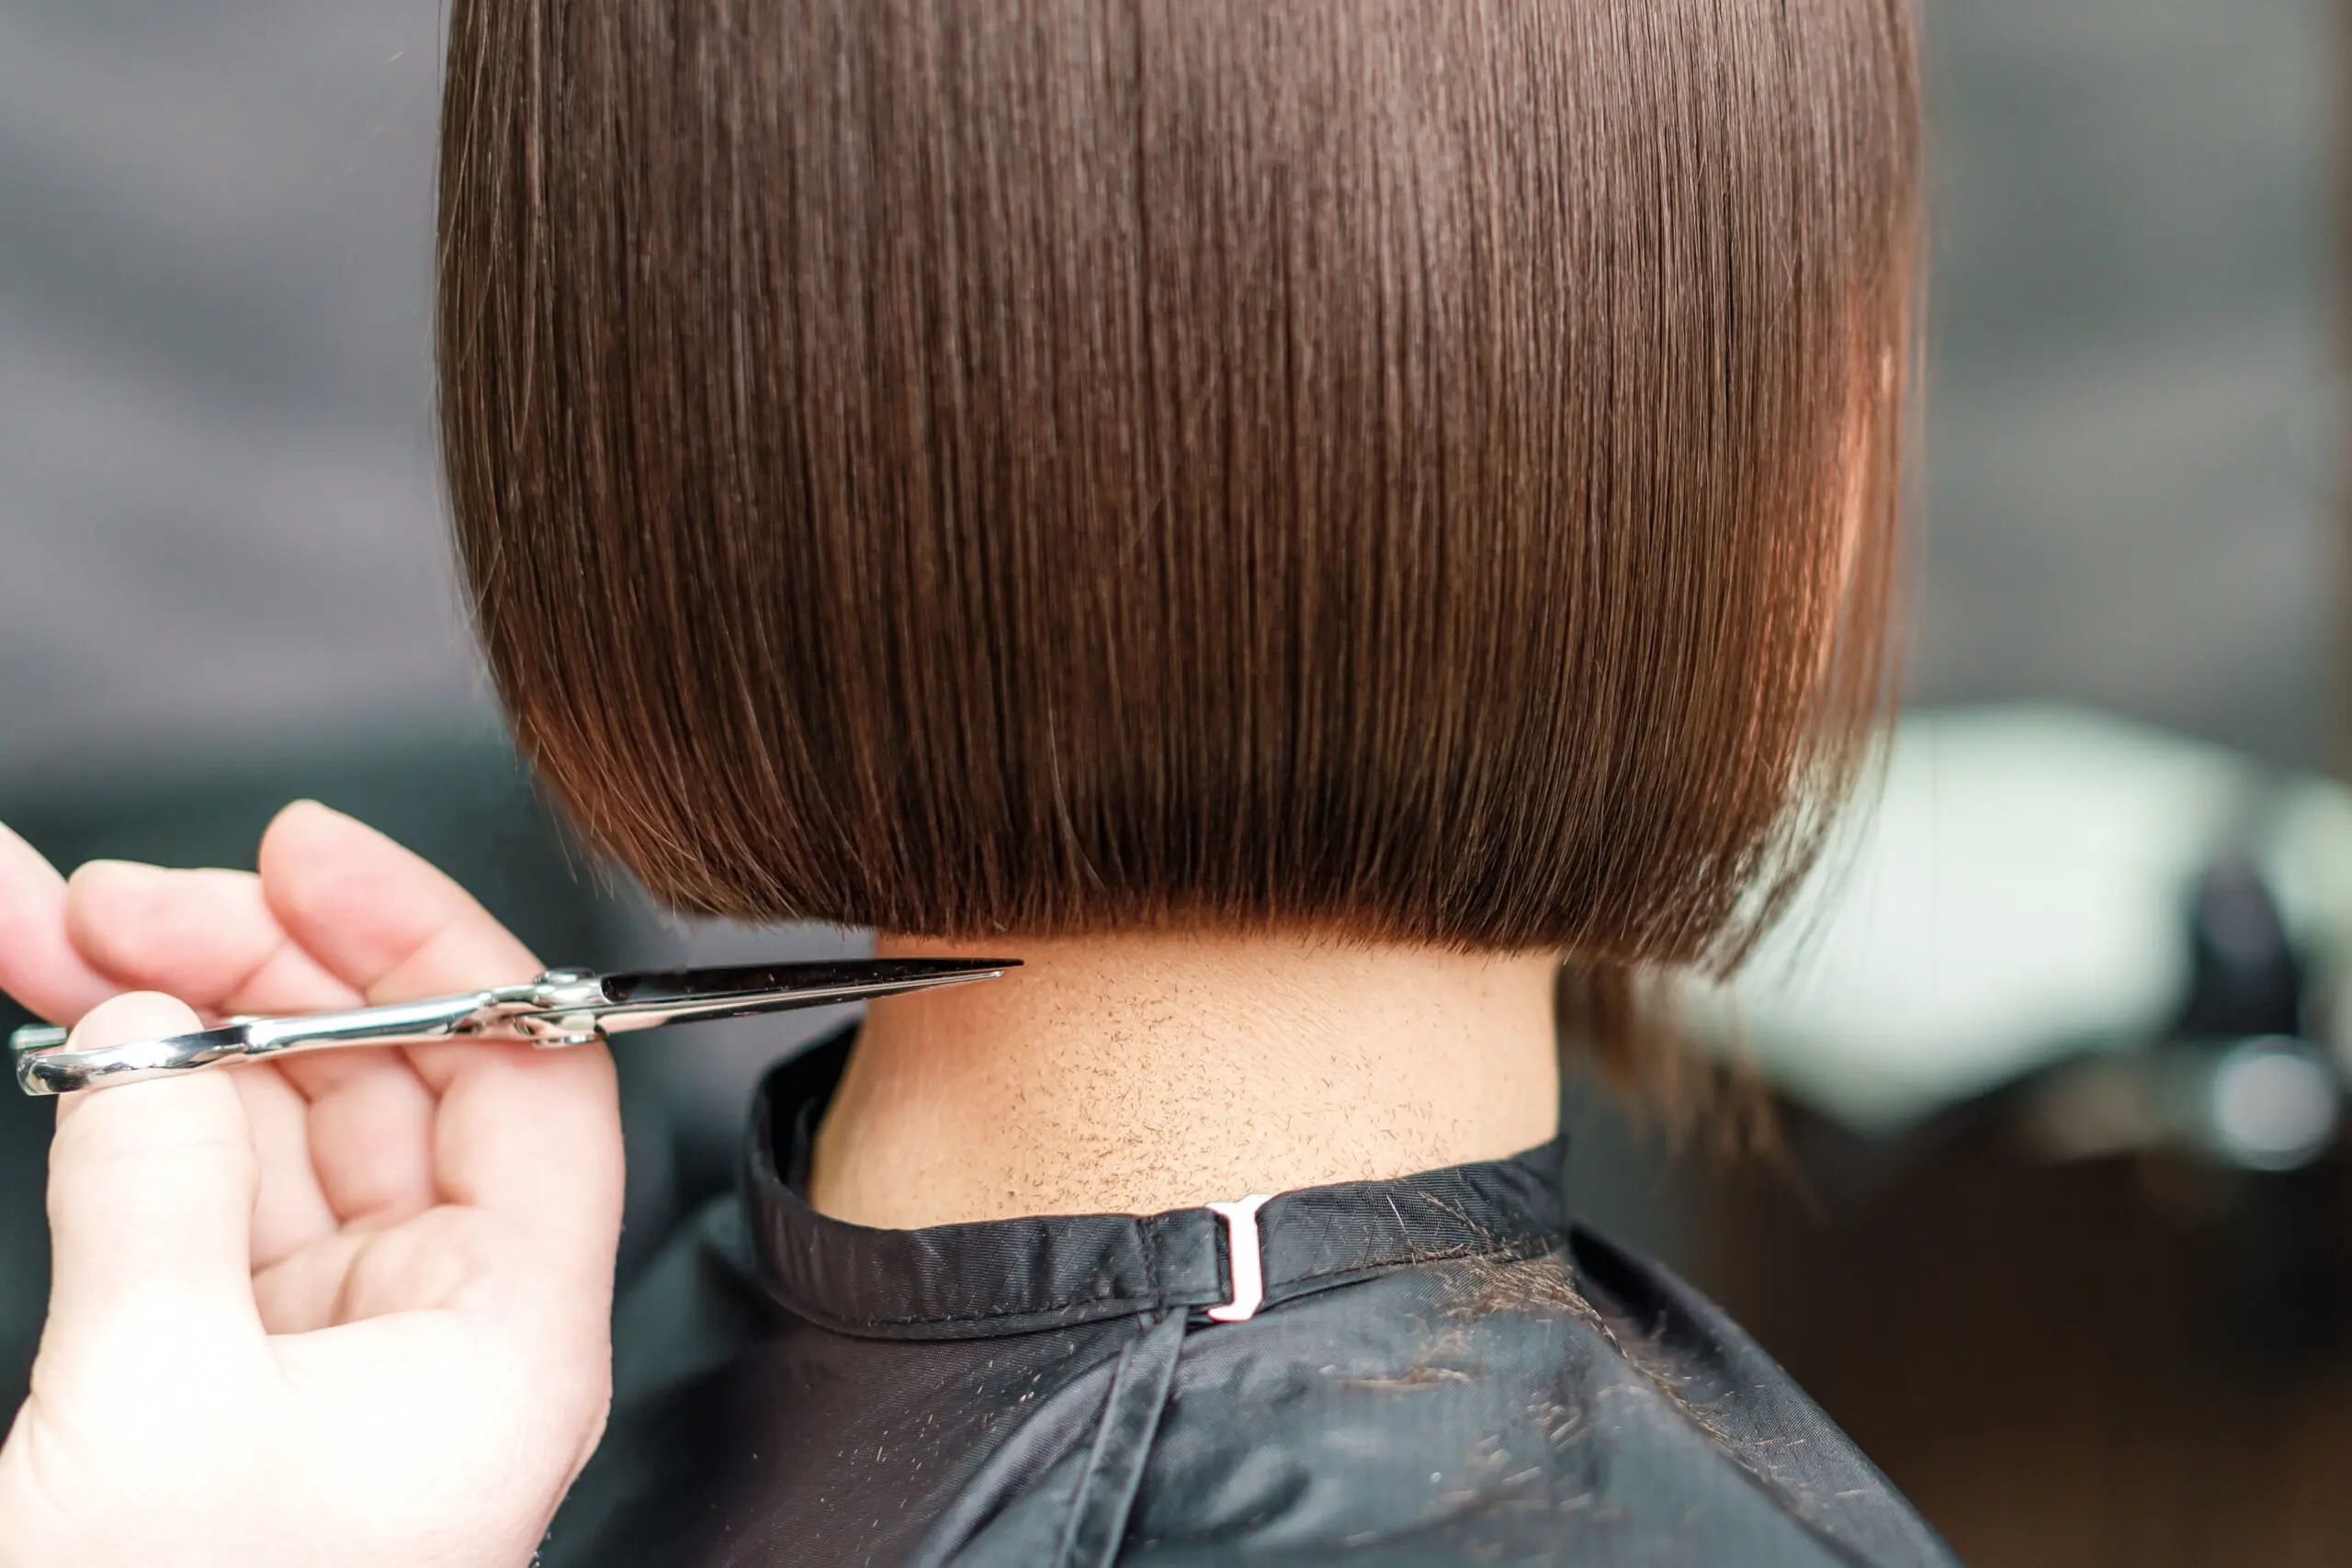 This is exactly, why getting hair cut every 6 weeks is best for short  hairstyles